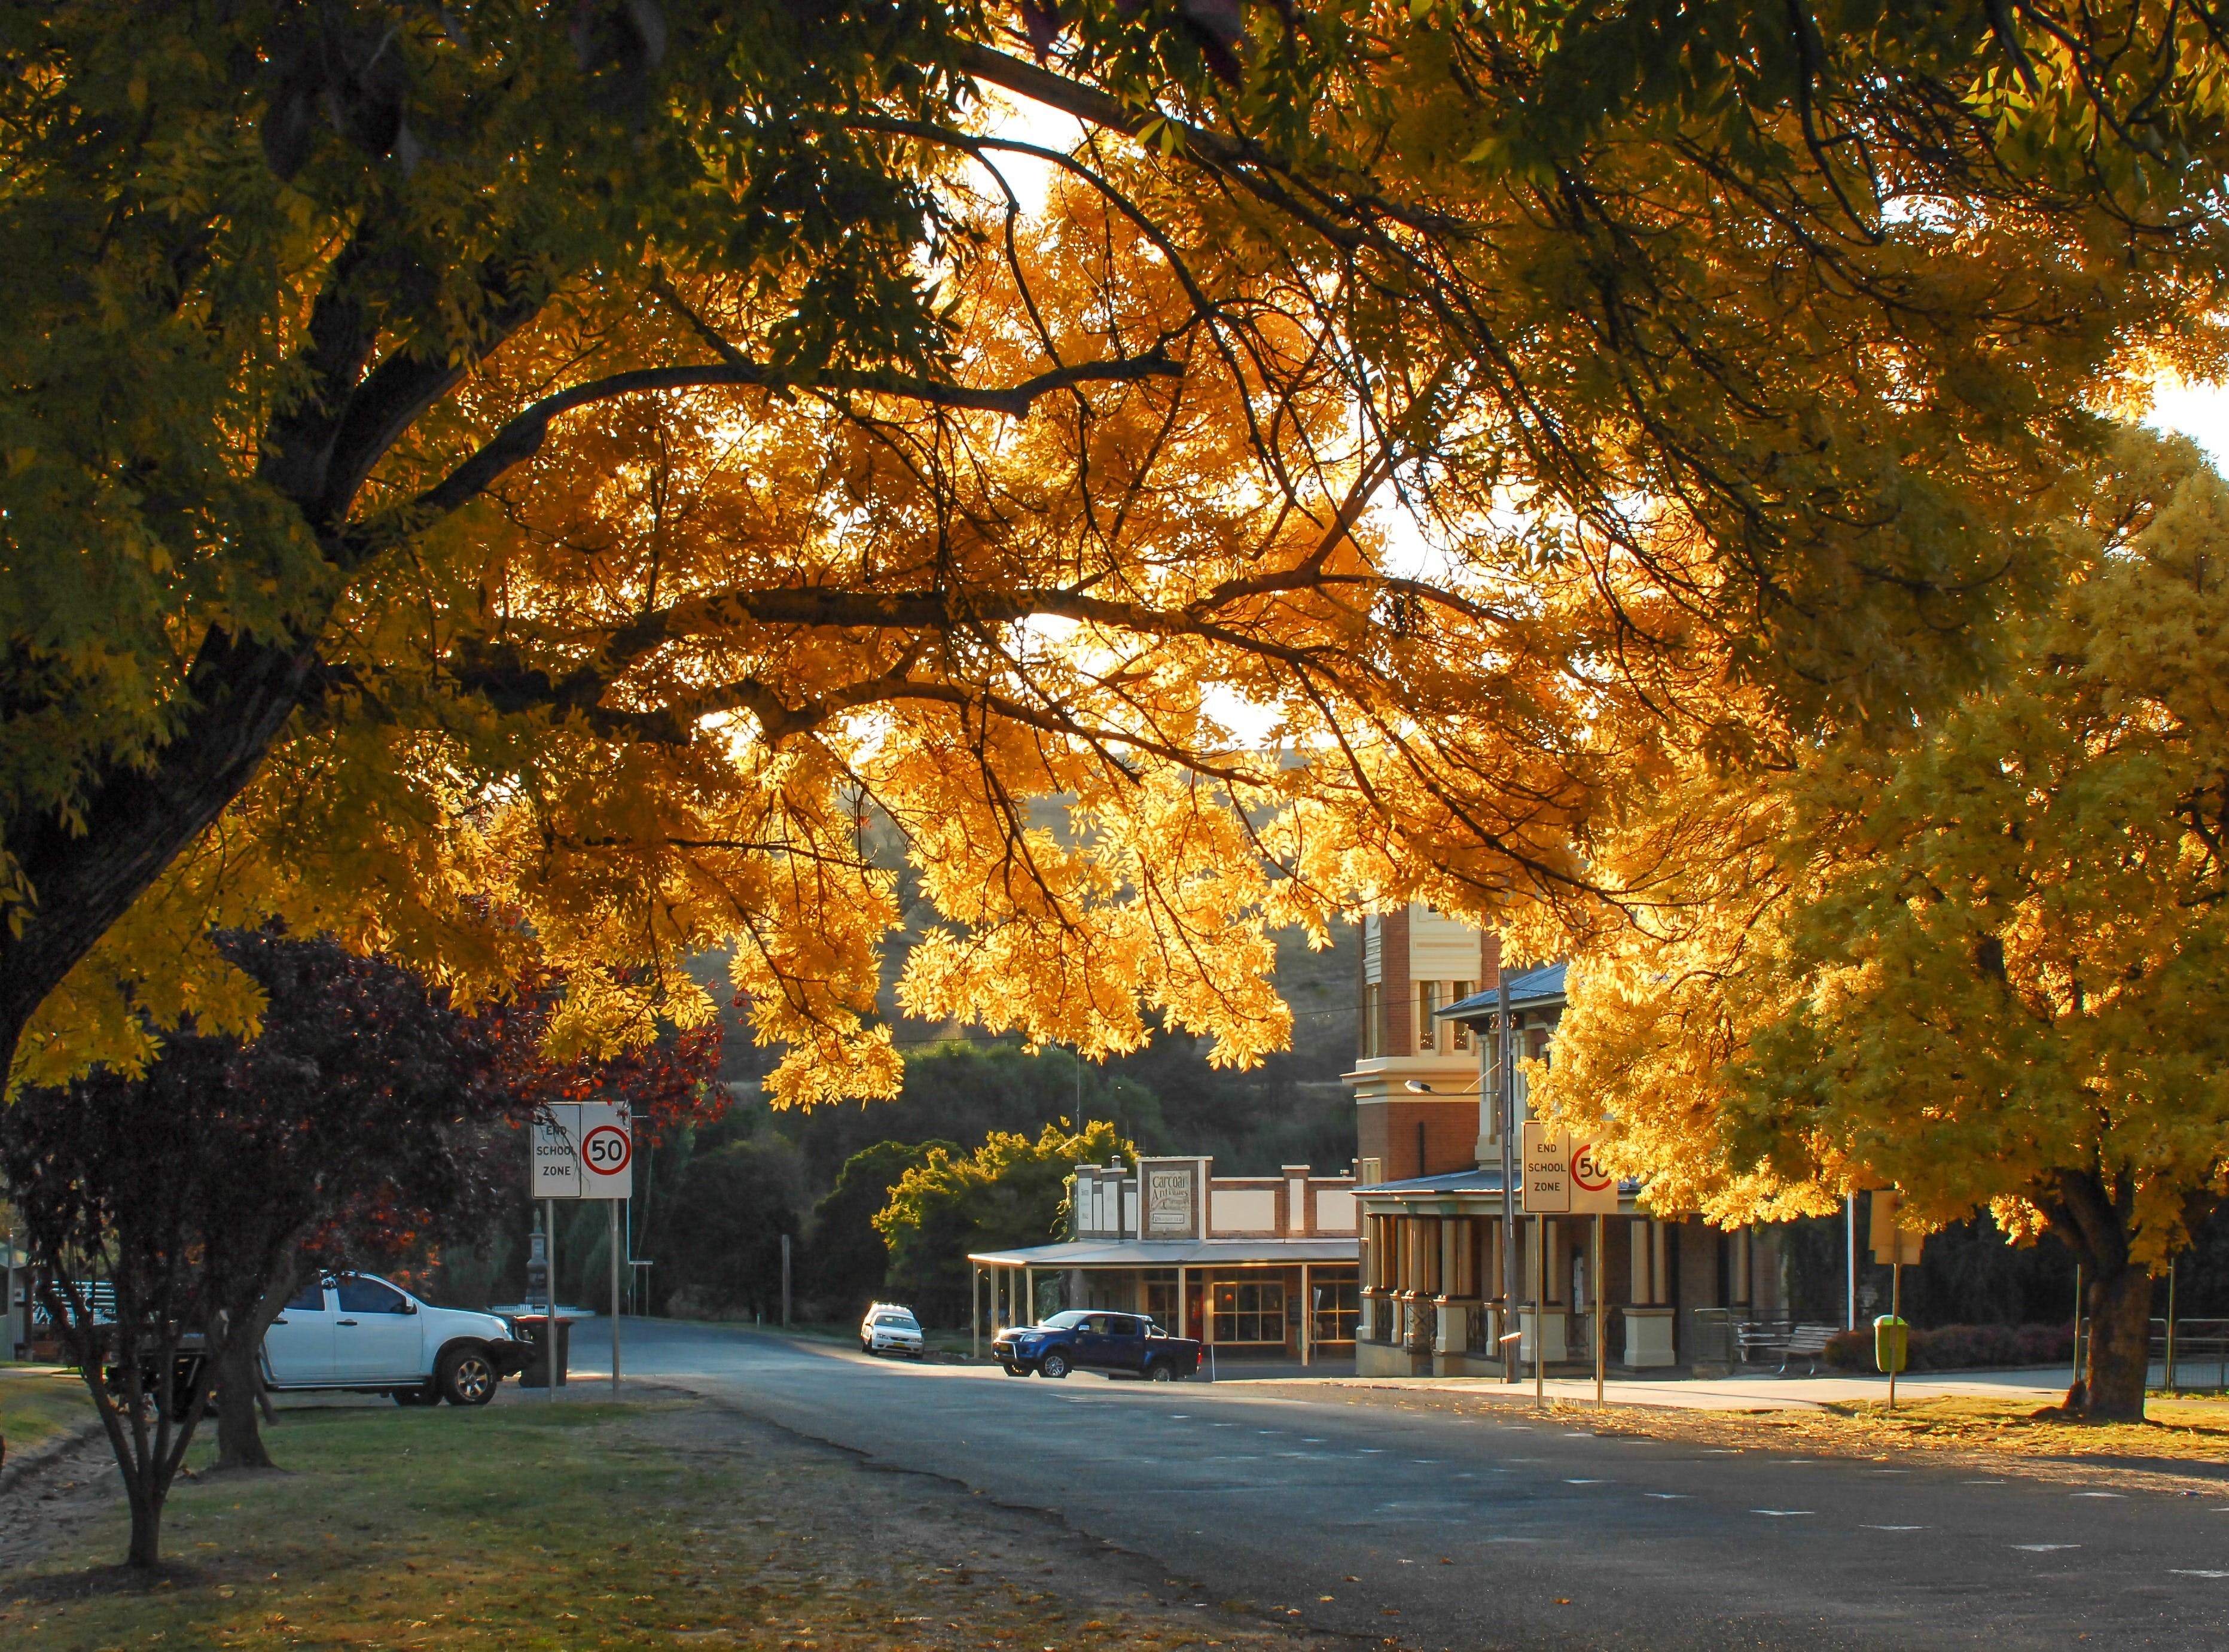 Carcoar - Find Attractions